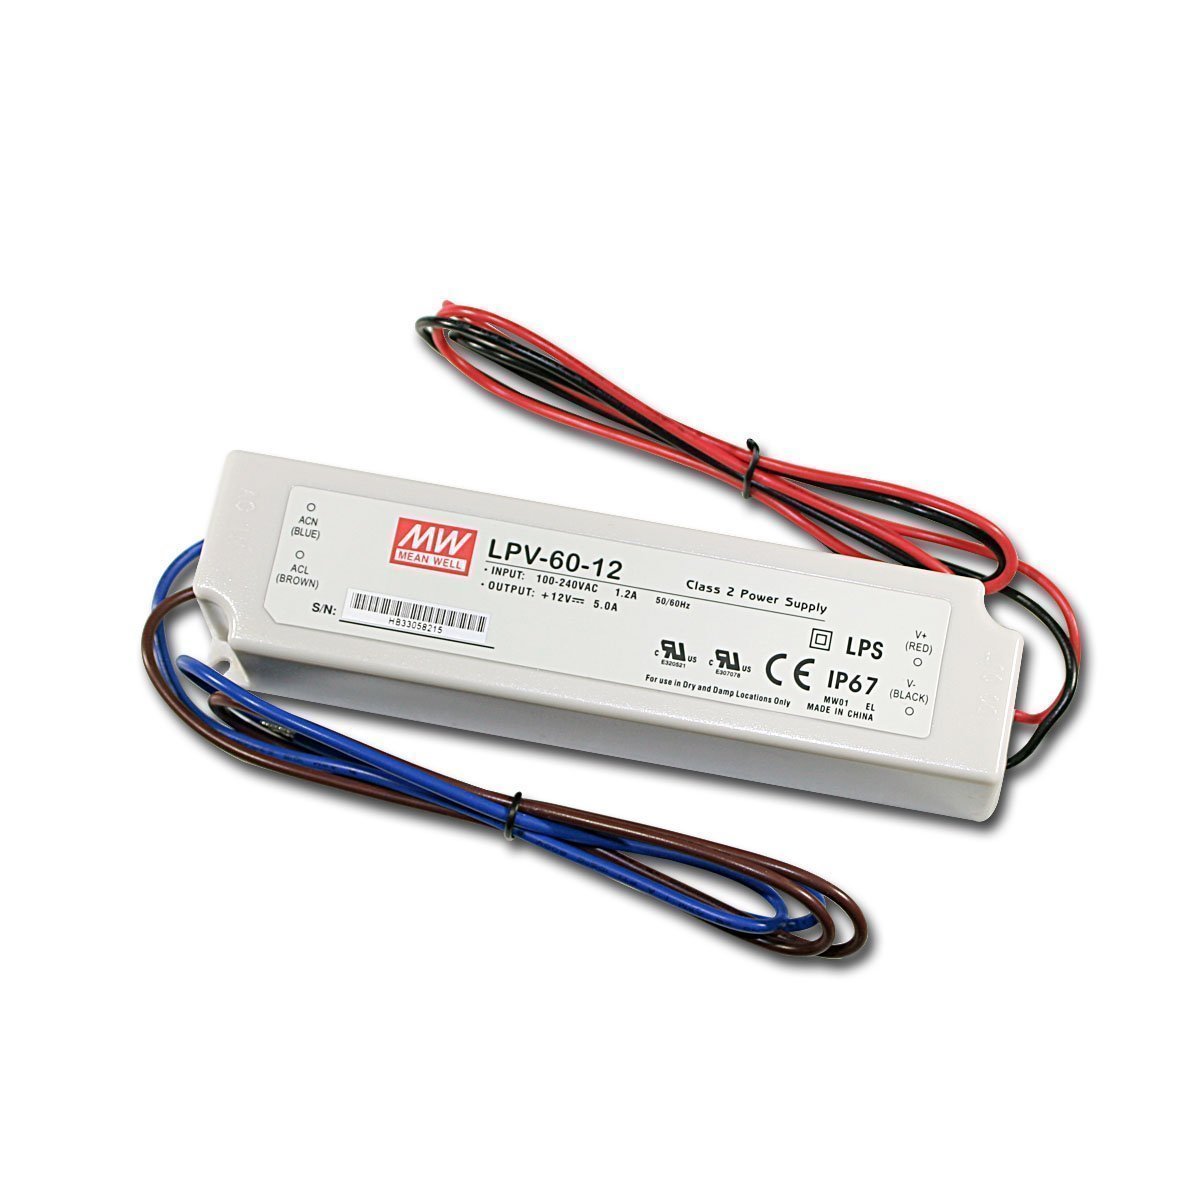 60W Mean Well Class 2 LED Power Supply (12VDC or 24VDC)